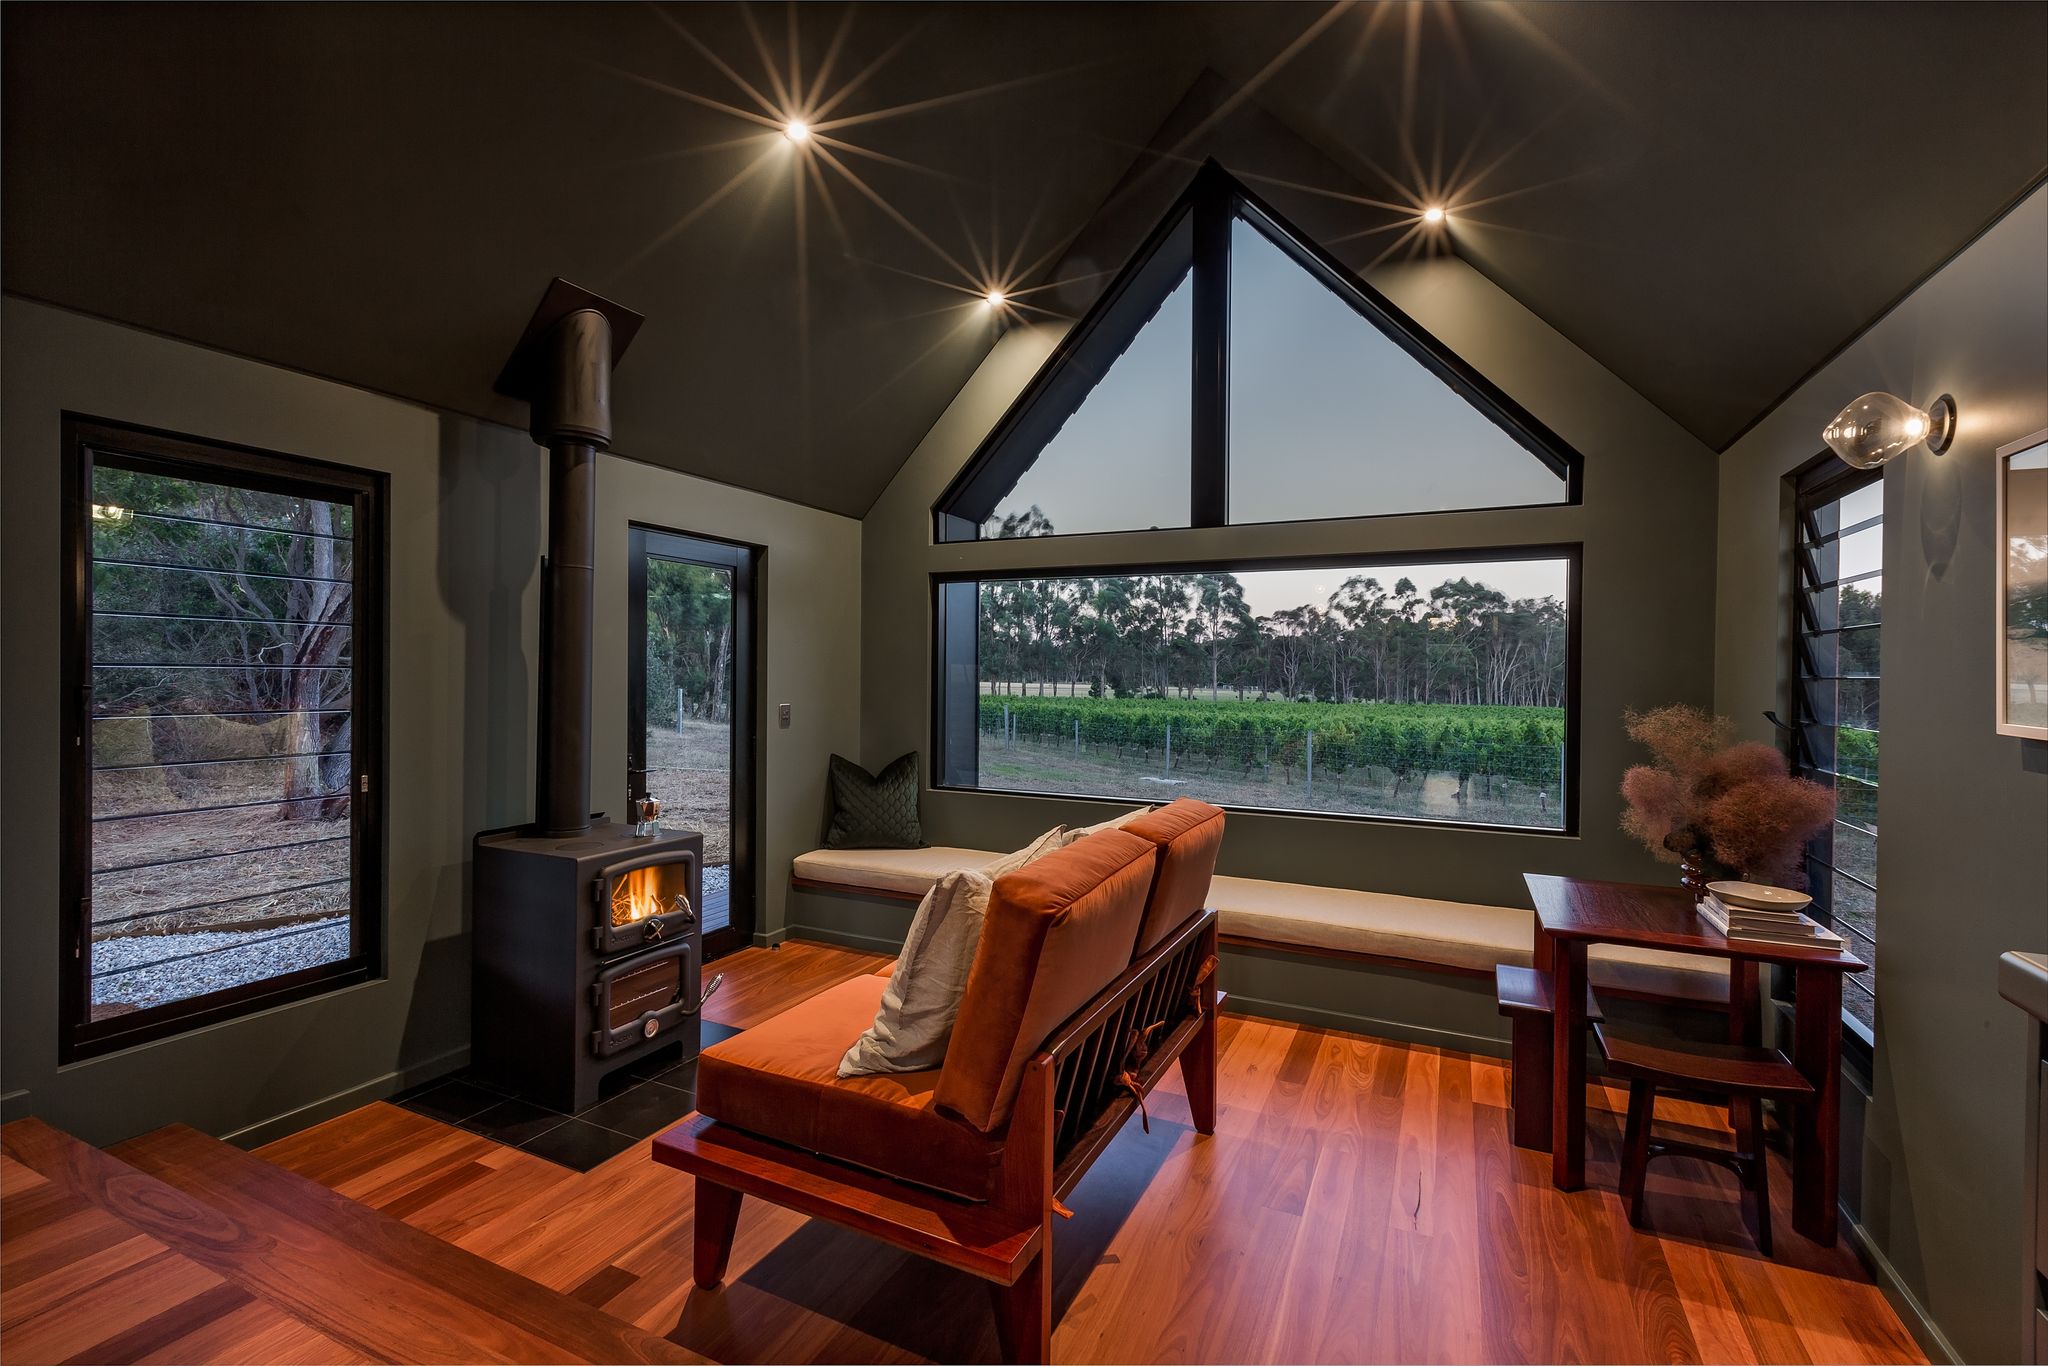 Fireplace inside Petit Eco Cabin at Windows Estate. Credit Ange Wall Photographer